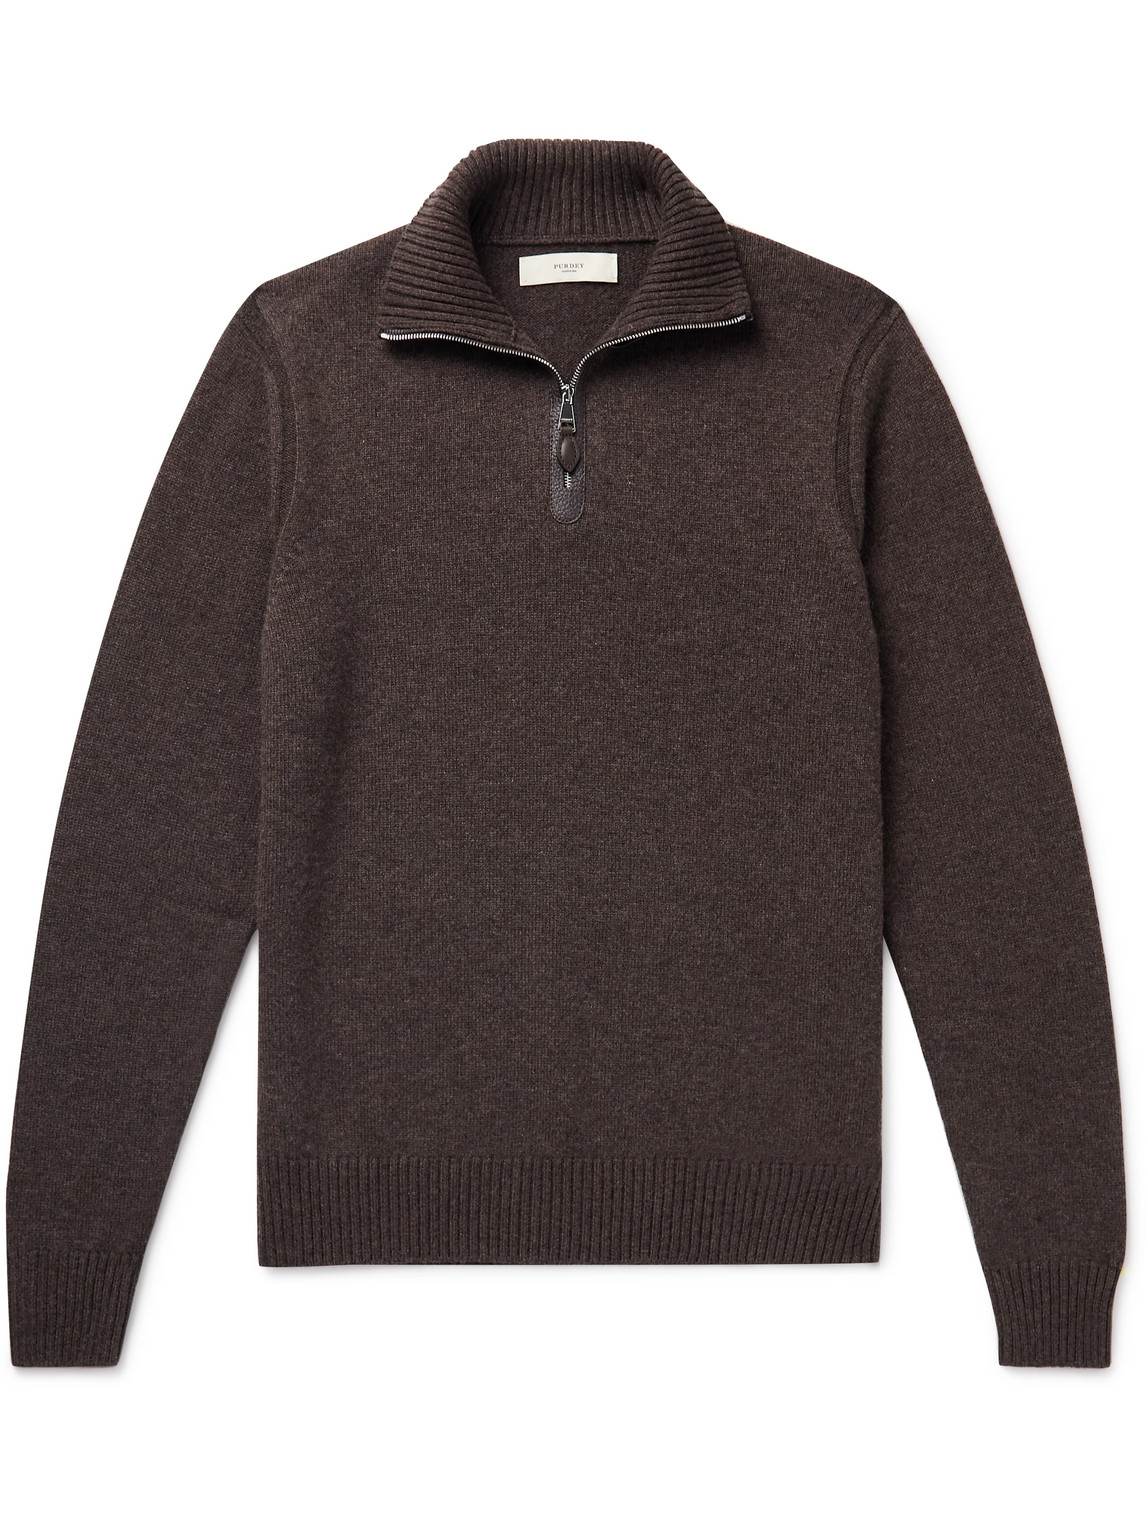 Leather-Trimmed Cashmere Half-Zip Sweater